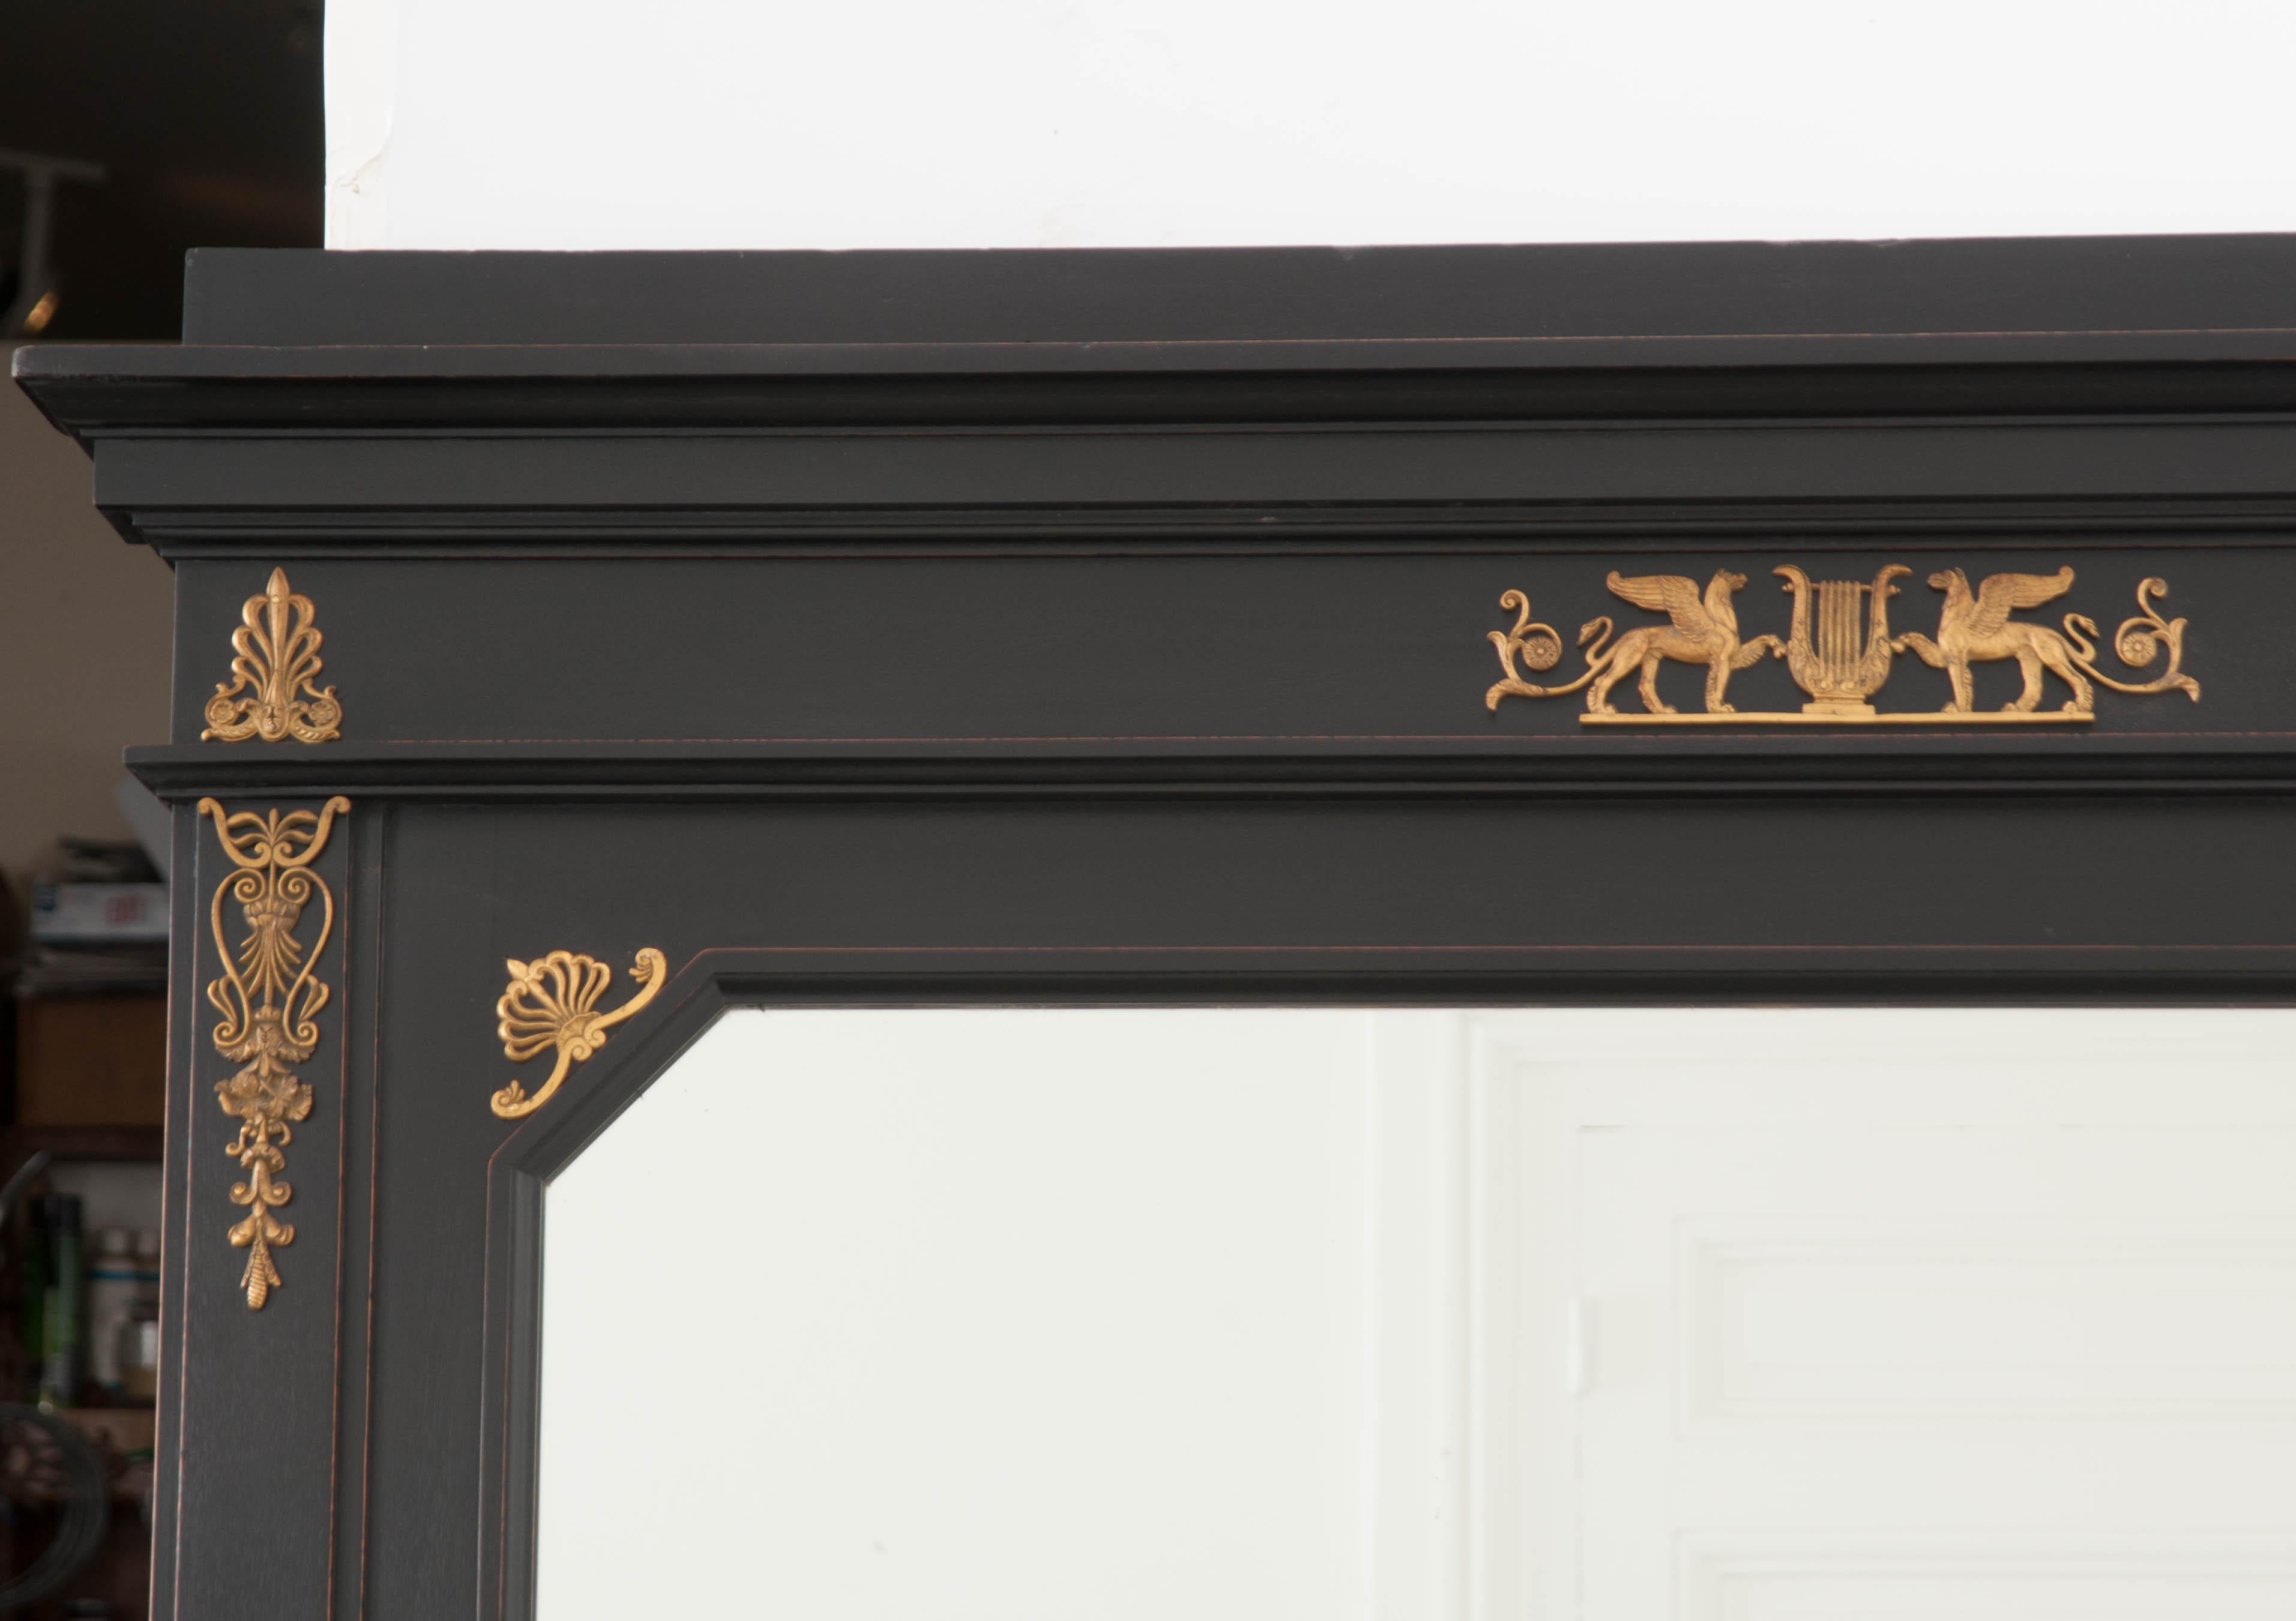 Refine your living space with this smart and sophisticated Empire style trumeau, done in ebony and brass, from 19th century France. This stately antique will command the attention of all those lucky enough to encounter it. The tall mirror retains